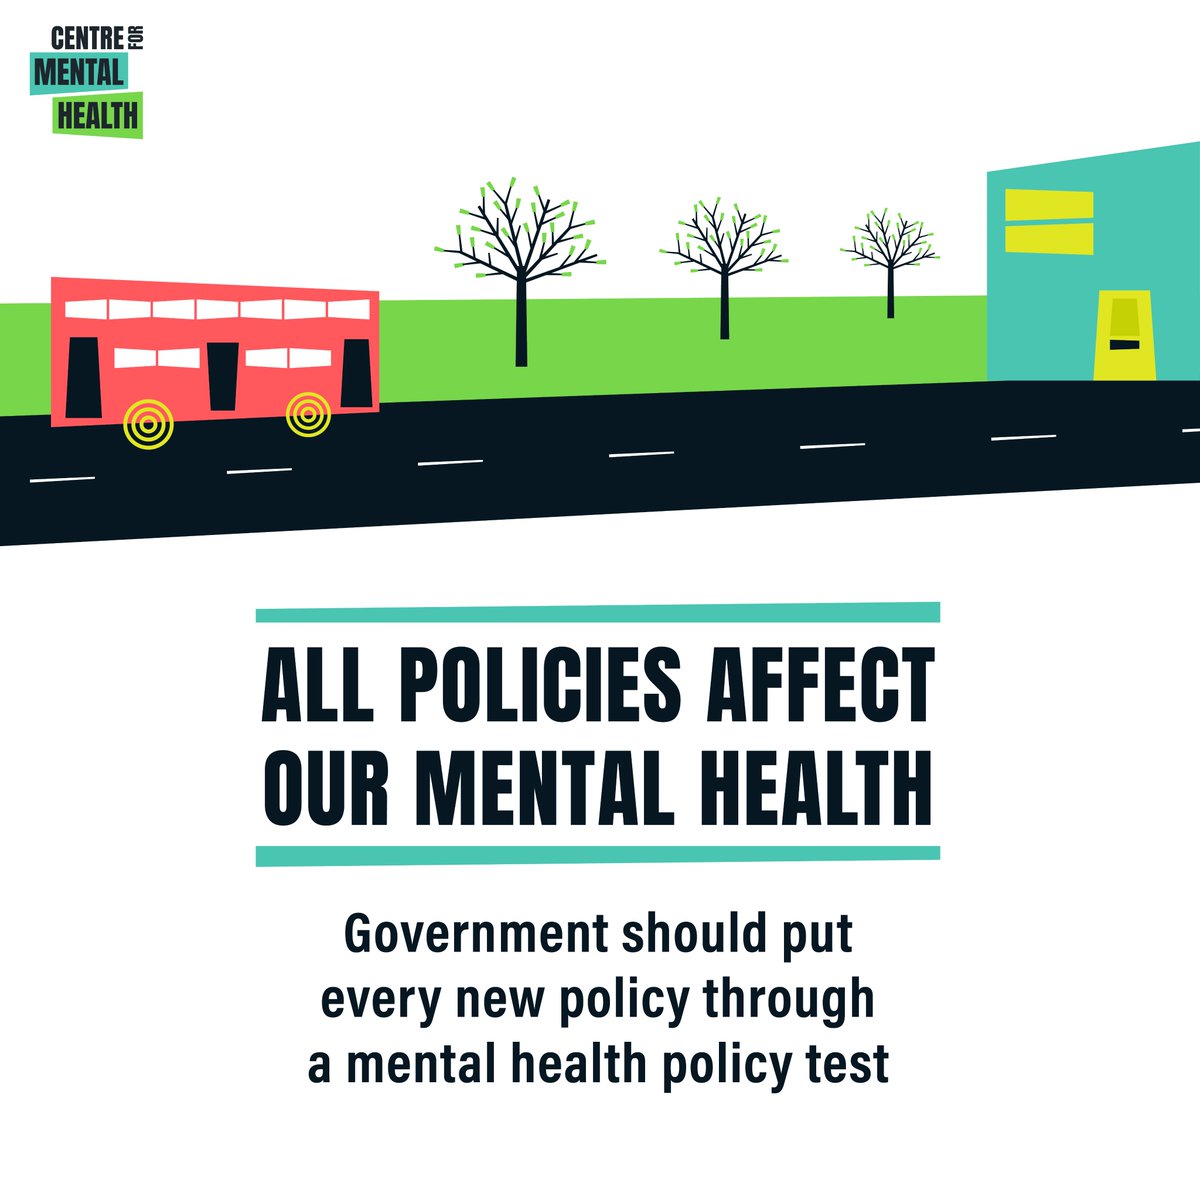 📢 All policies affect our mental health, for good or ill. So we're calling on the Government to put every new policy through a 'mental health policy test' to assess how it will affect people's wellbeing: centreformentalhealth.org.uk/publications/p… #MentalHealthPolicyTest #MentalHealthAwarenessWeek